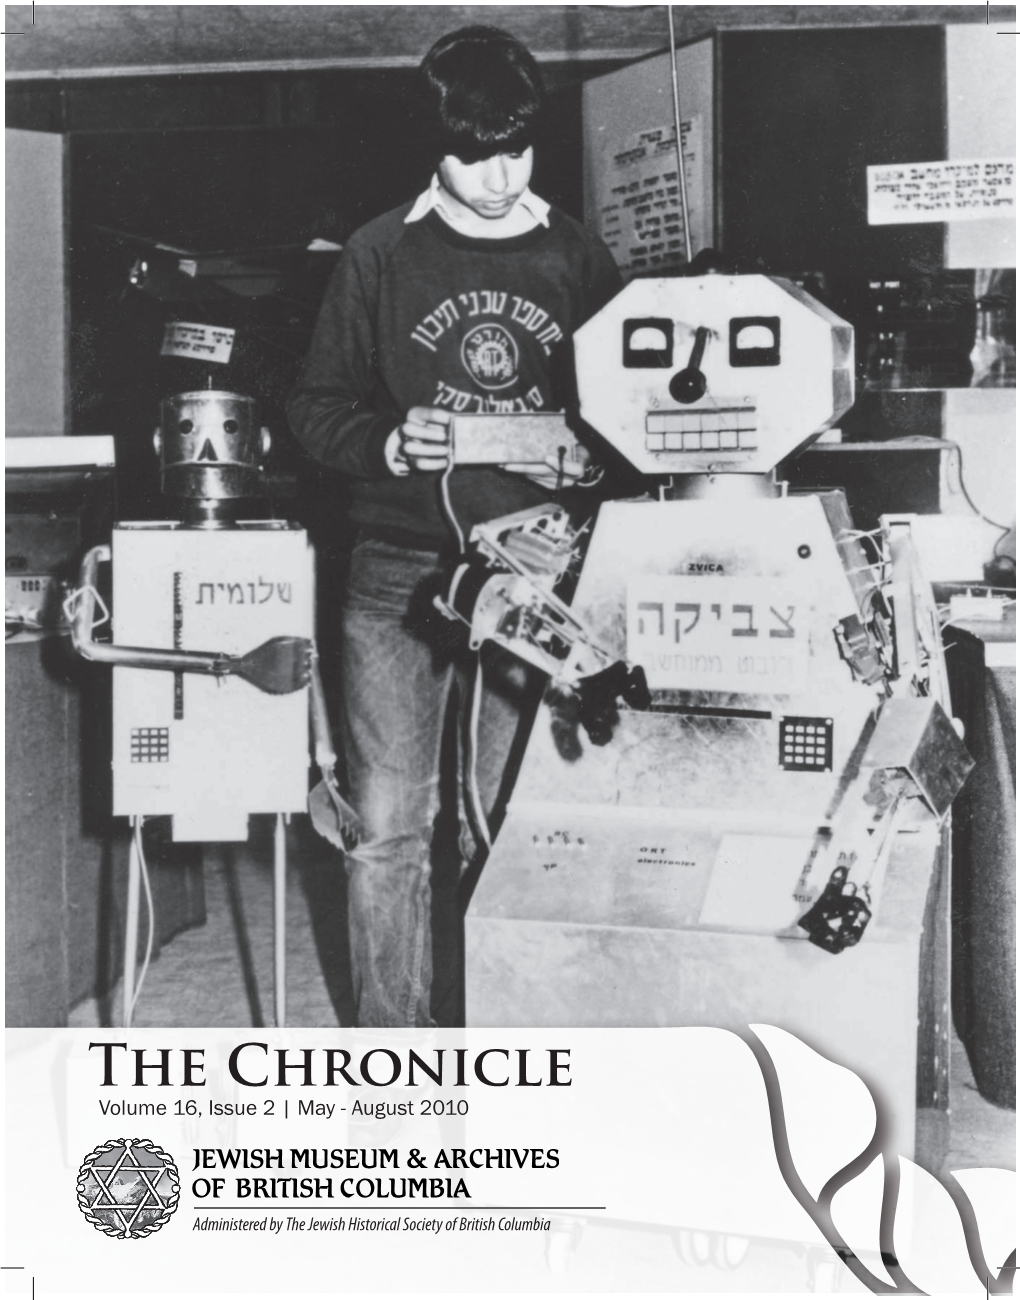 The Chronicle Volume 16, Issue 2 | May - August 2010